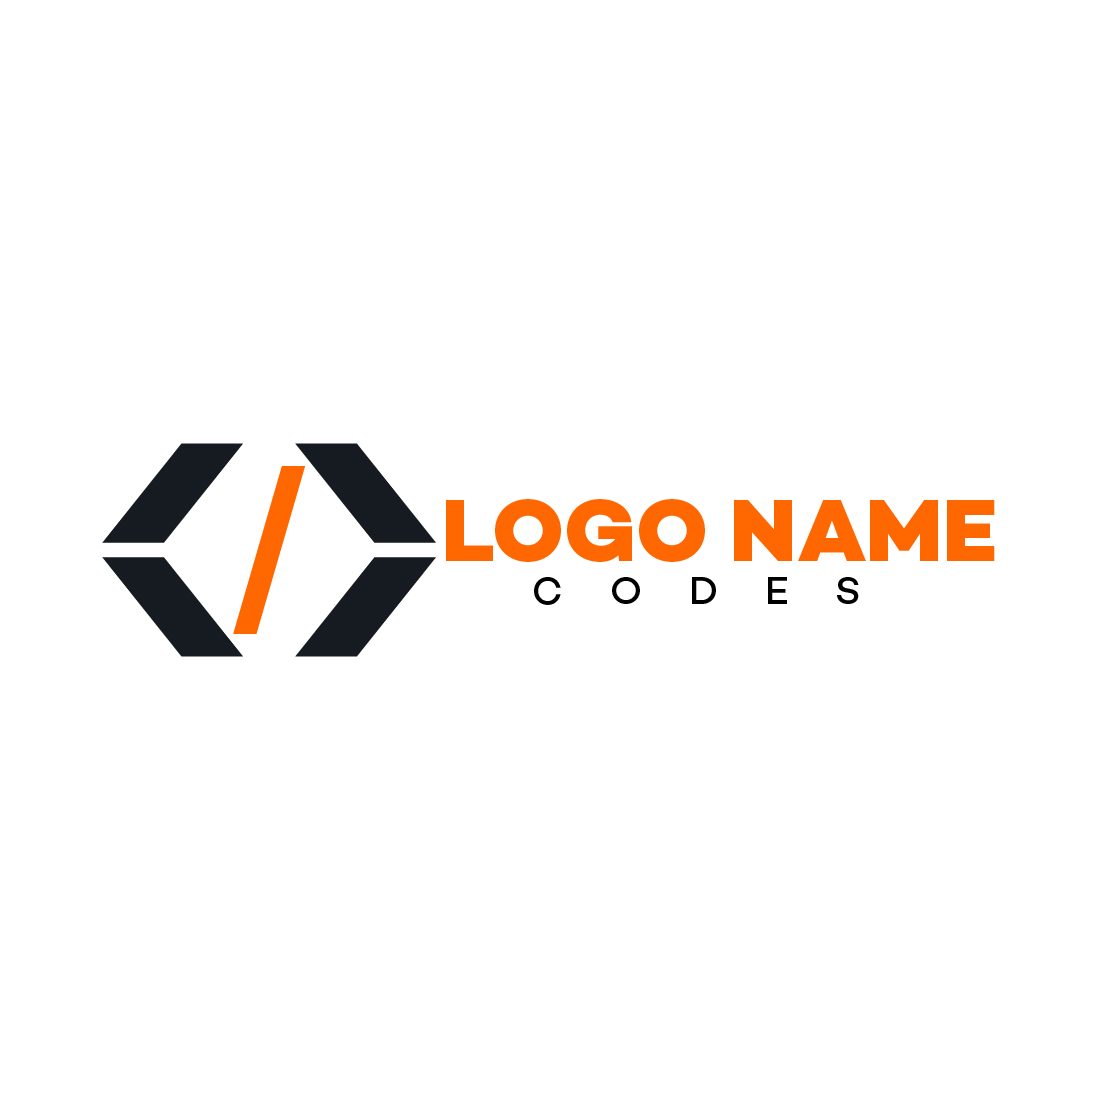 Coding Logo Template cover image.